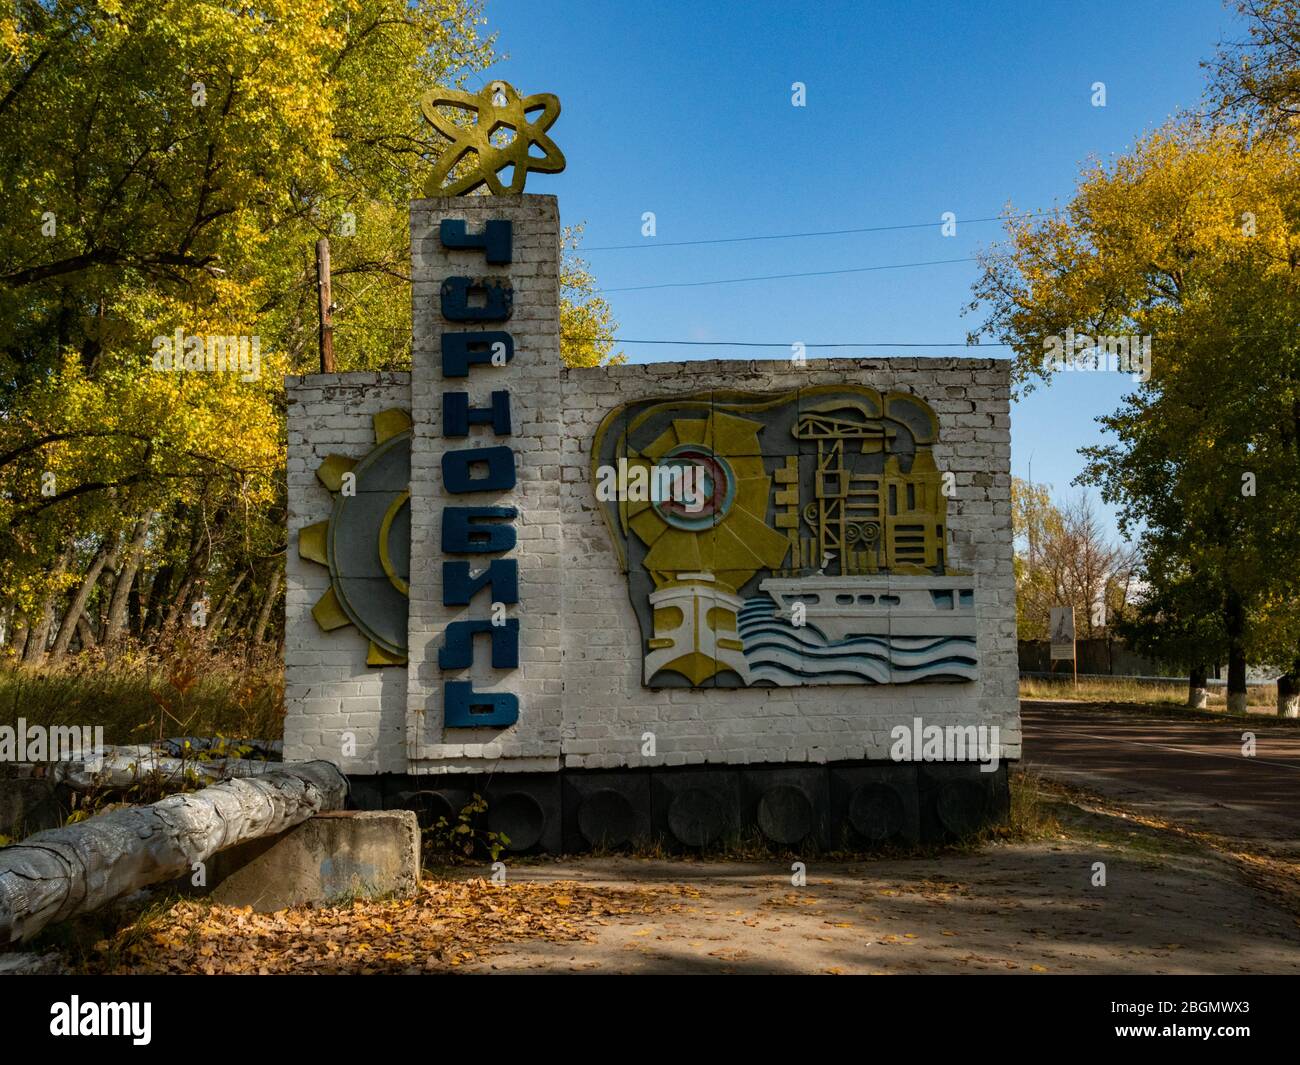 Town sign at the entrance of the abandoned city of Chernobyl in the Ukraine, the sign shows the name Chernobyl in Cyrillic letters in vertical directi Stock Photo